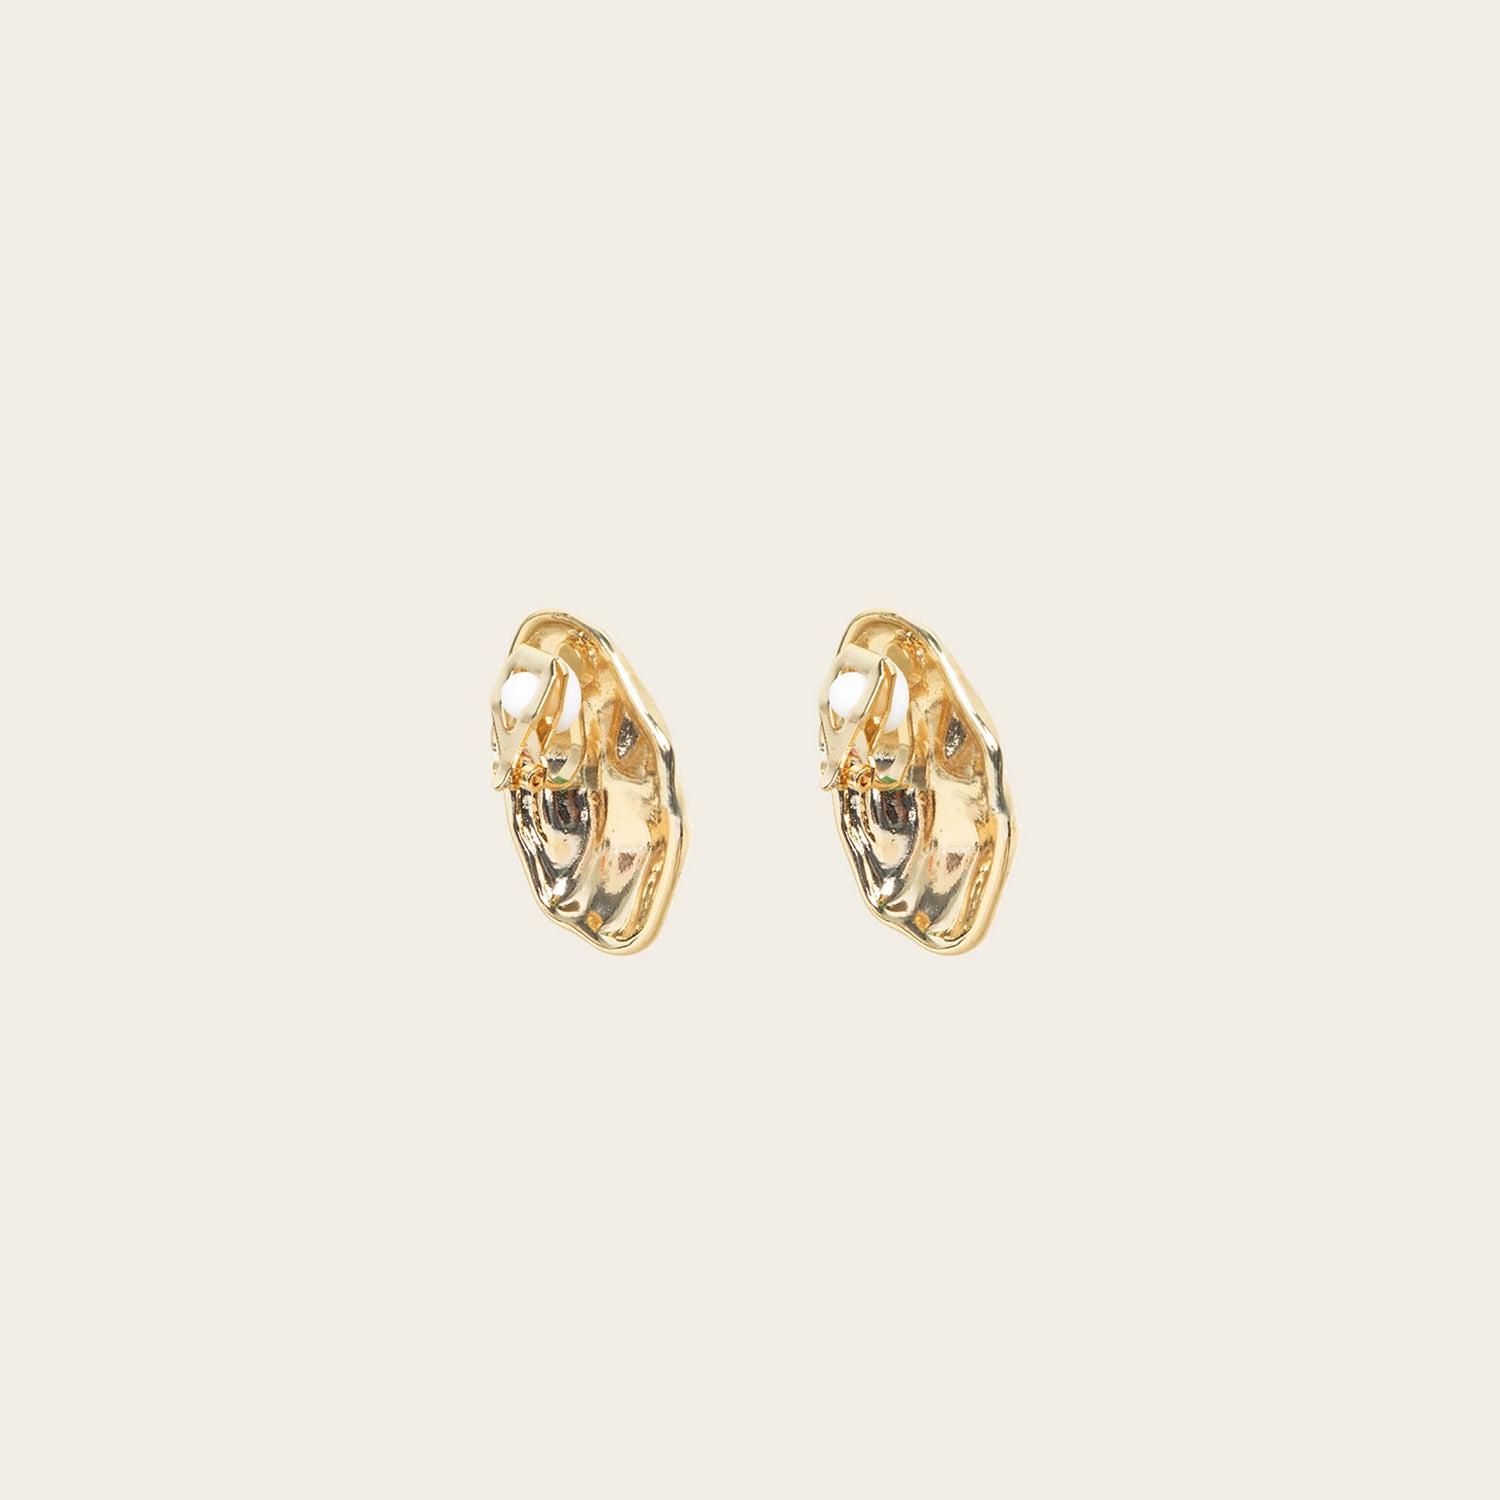 Image of the Amaya Clip On Earrings in Gold feature a secure padded clip-on closure type, making them suitable for all ear types.The average comfortable wear duration is 8-12 hours, and the Copper Alloy construction ensures a reliable and secure hold. The item is sold as one pair; adjustable rubber padding is included.